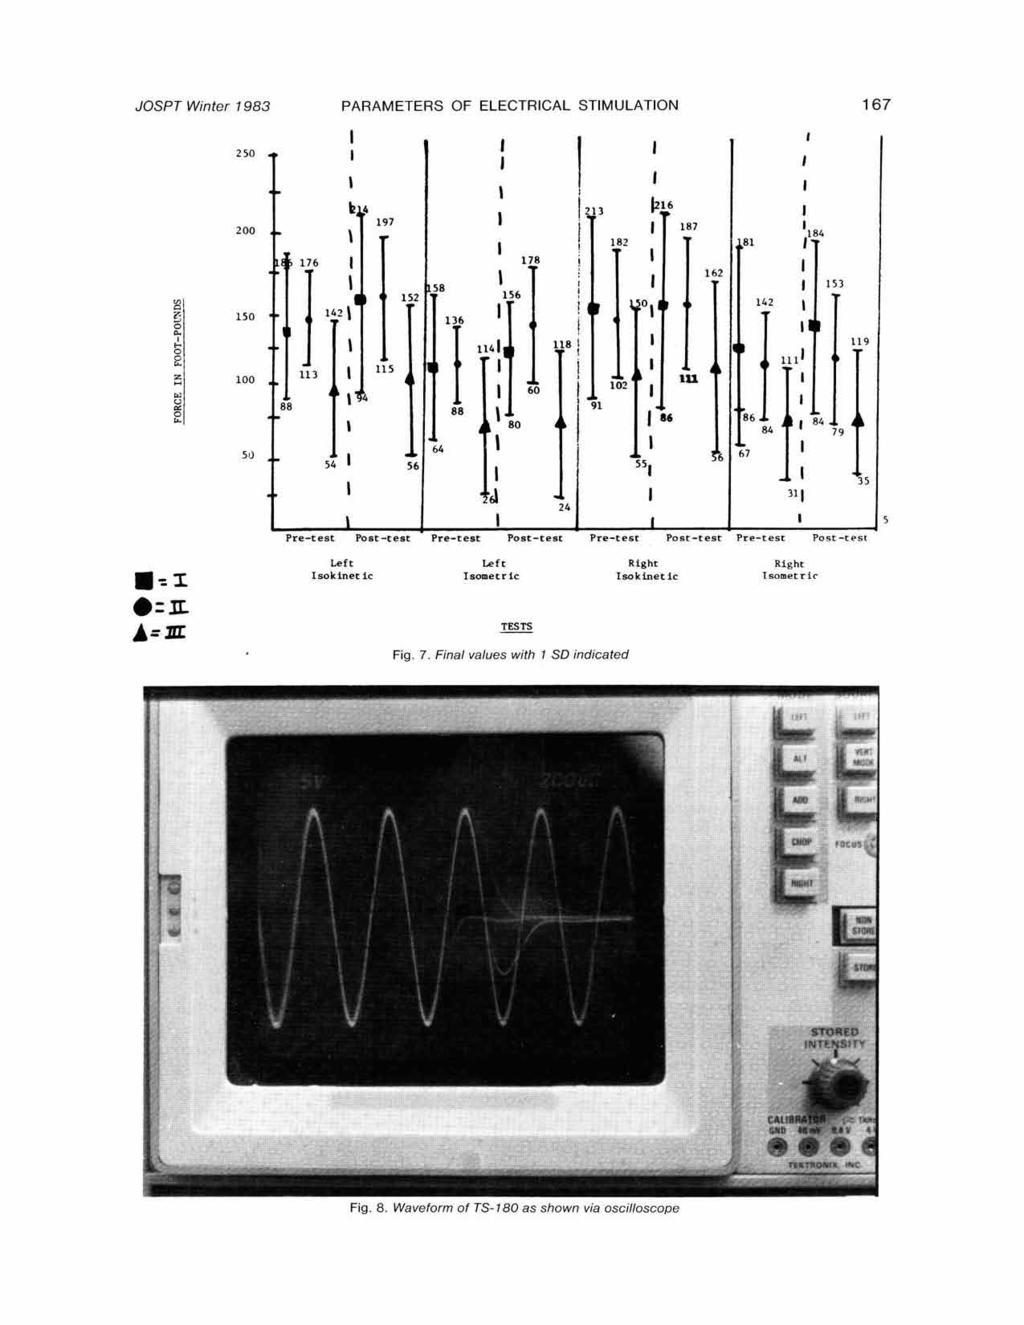 JOSPT Winter 1983 PARAMETERS OF ELECTRICAL STIMULATION 167 Copyright 1983. All rights reserved.